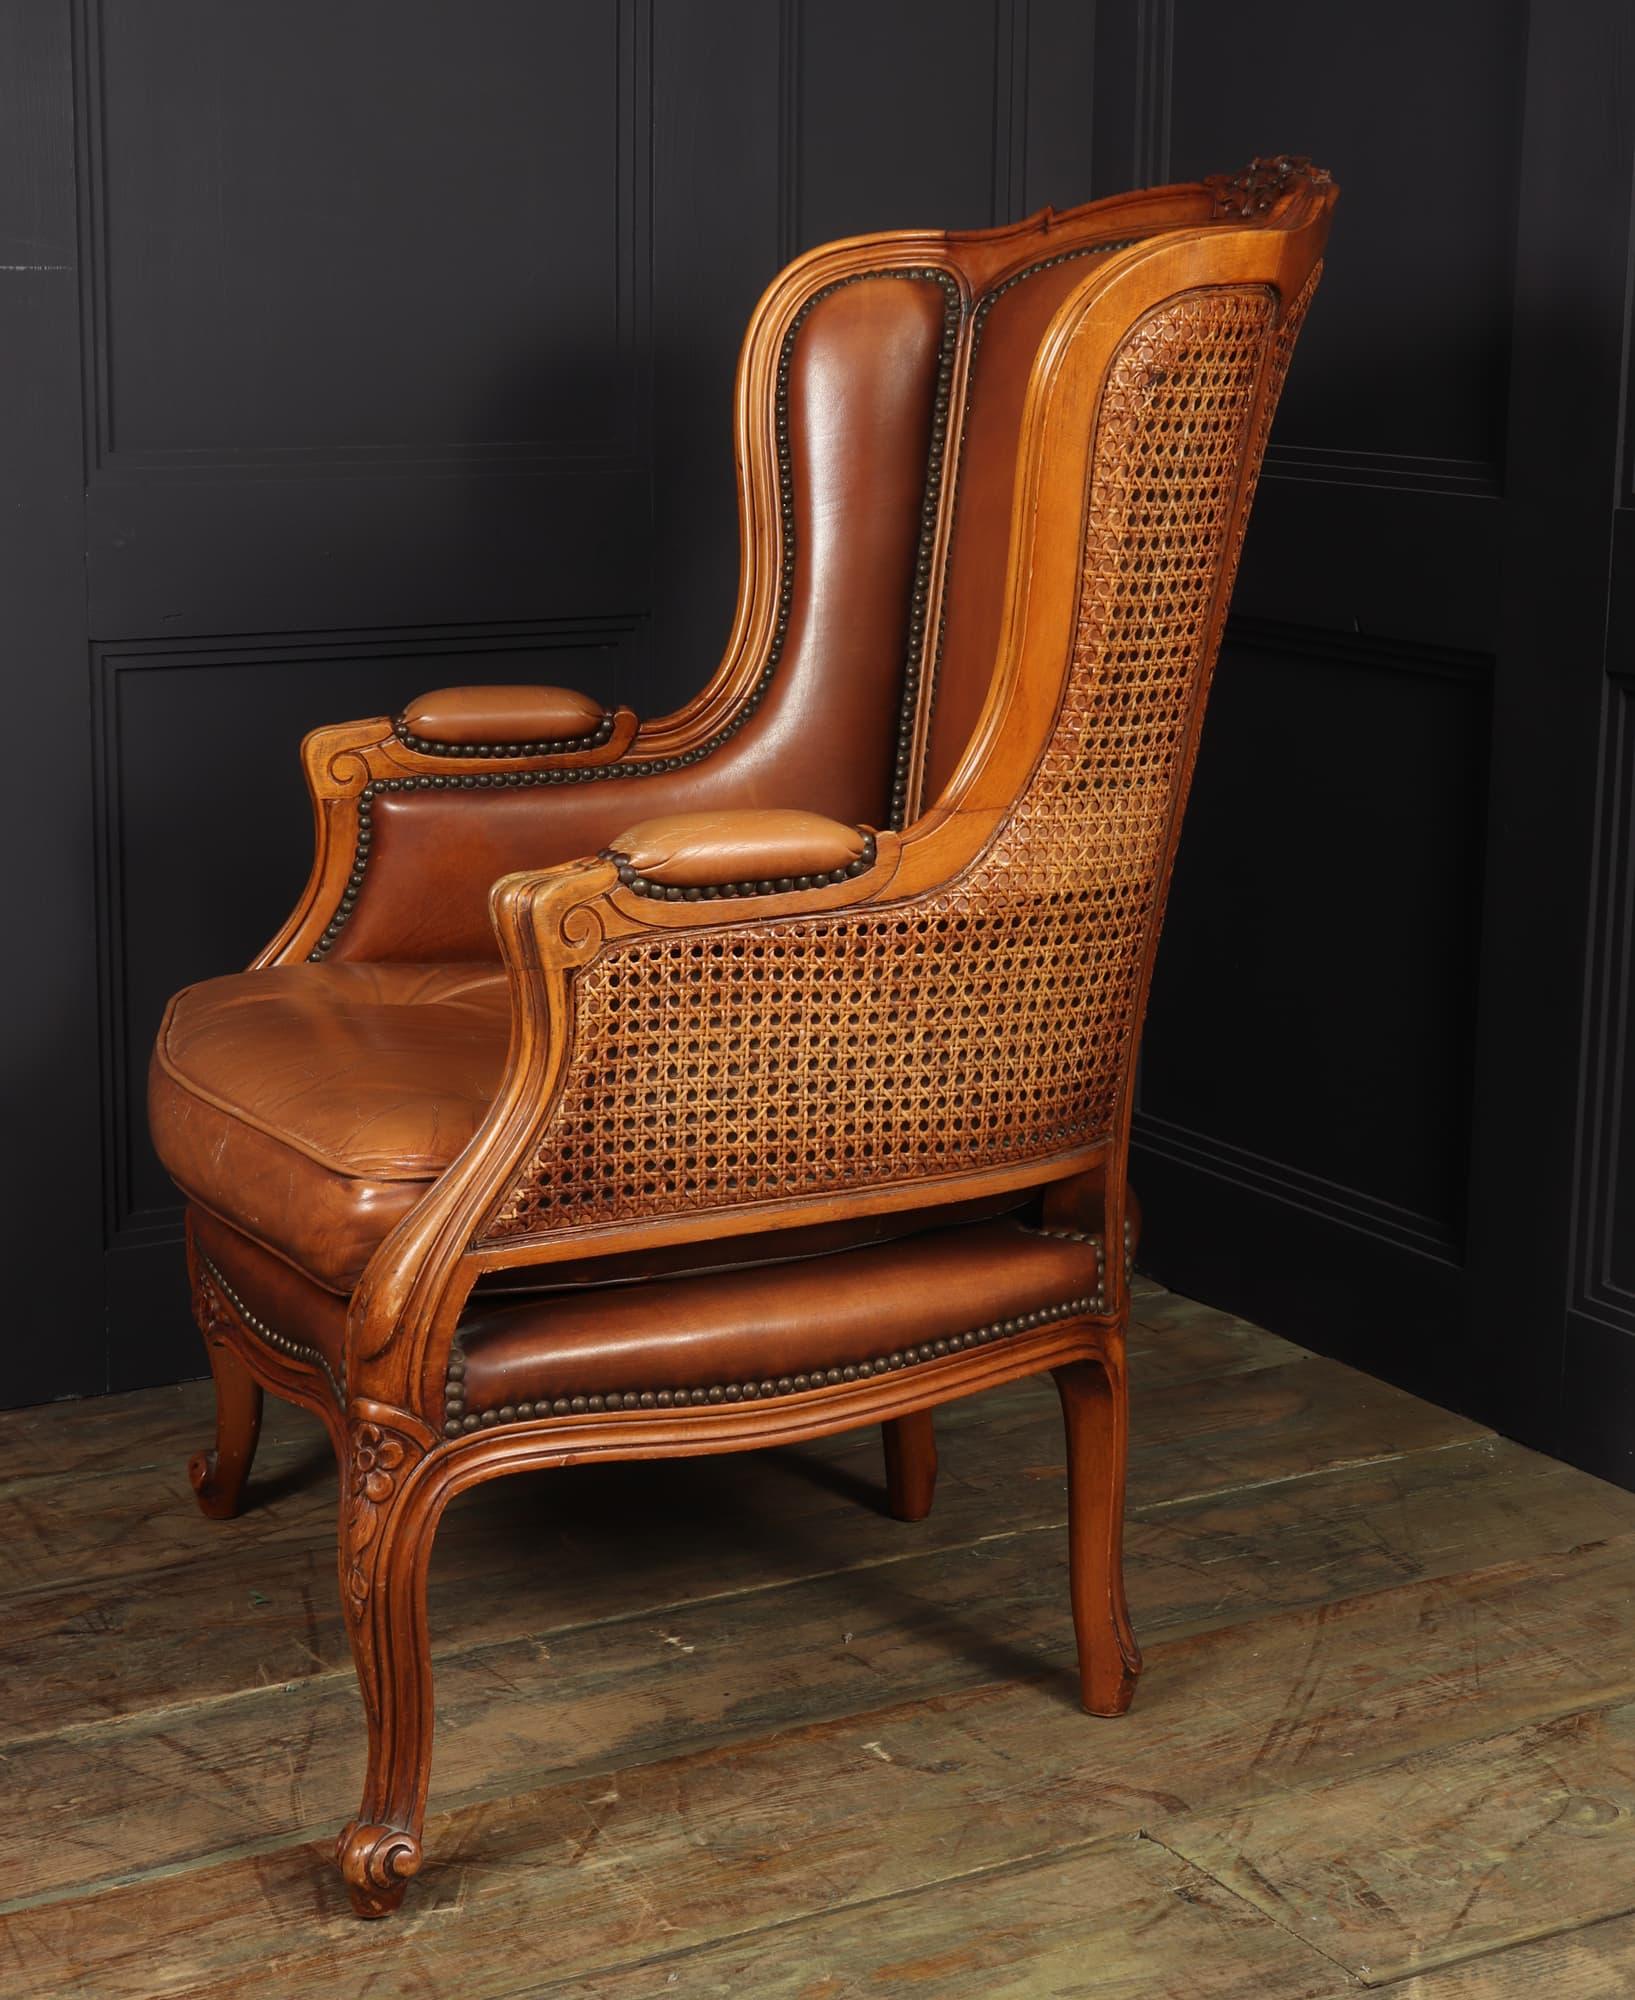 Mid-20th Century French Leather Bergere Chair Louis XV style